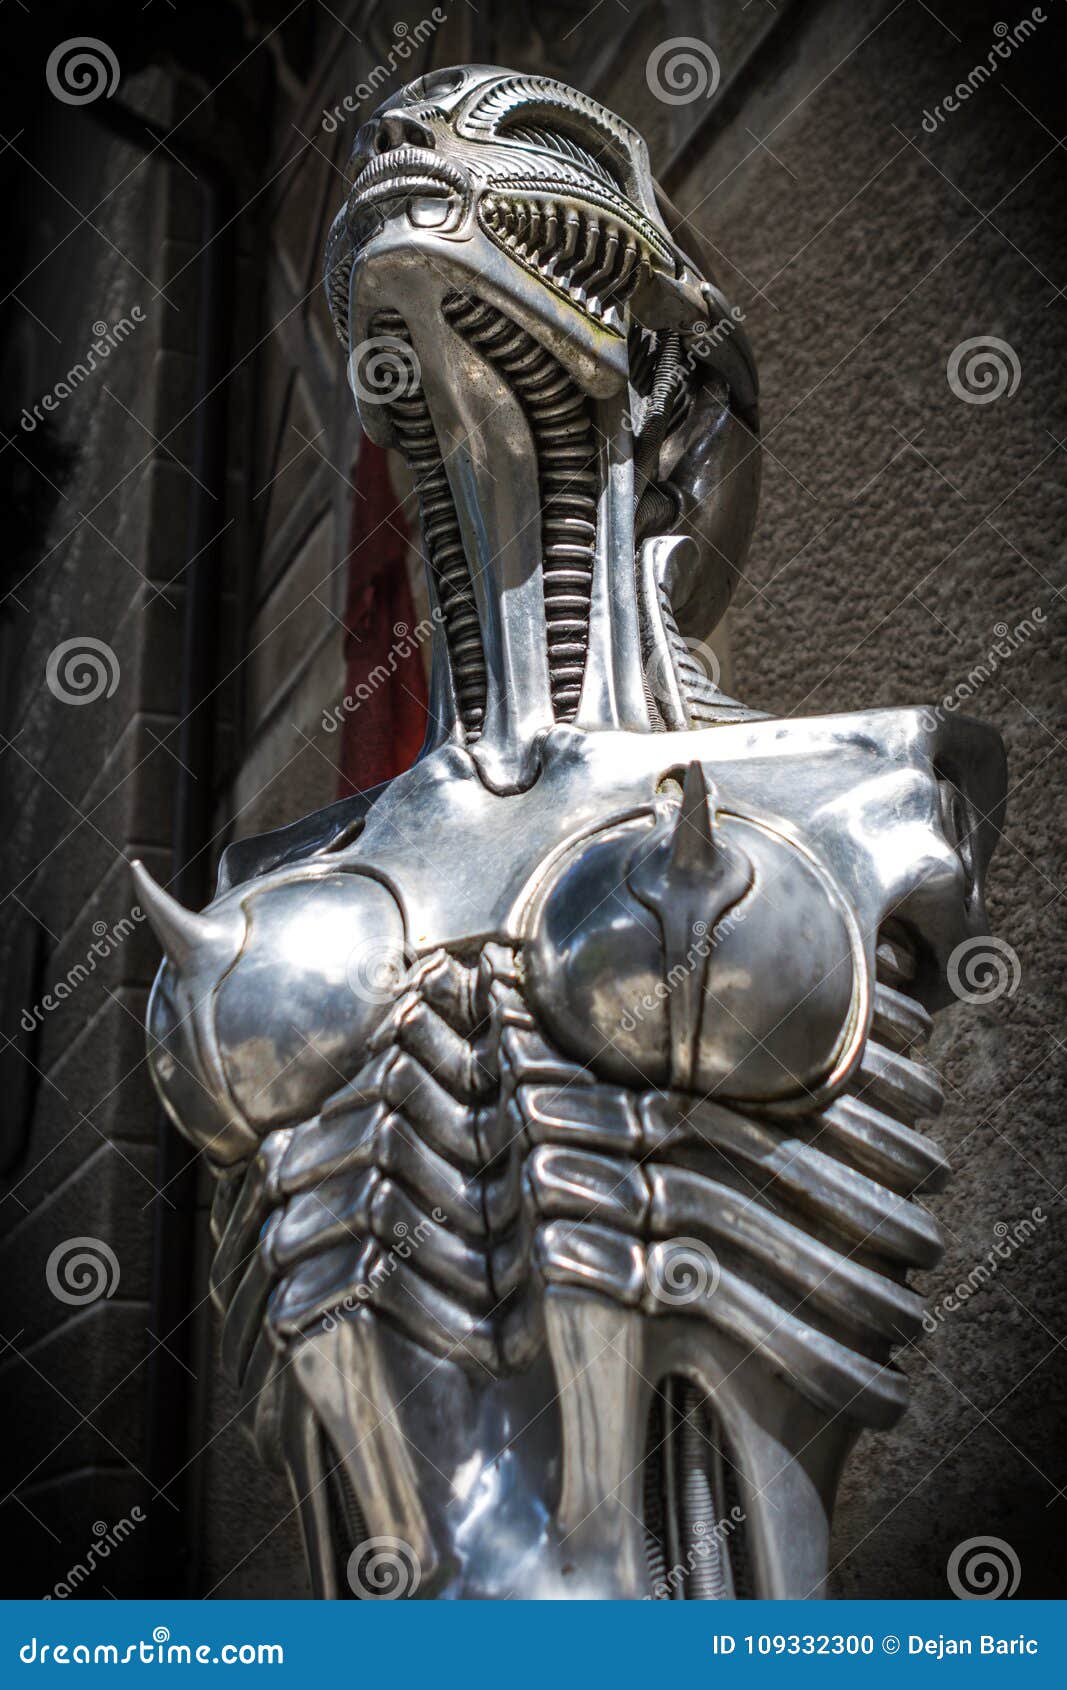 Gruyeres Switzerland June 10 16 Hr Giger Biomehanoid Statue In Front Of Giger Museum In Medieval Castle Swiss Village Editorial Image Image Of Alps Blue